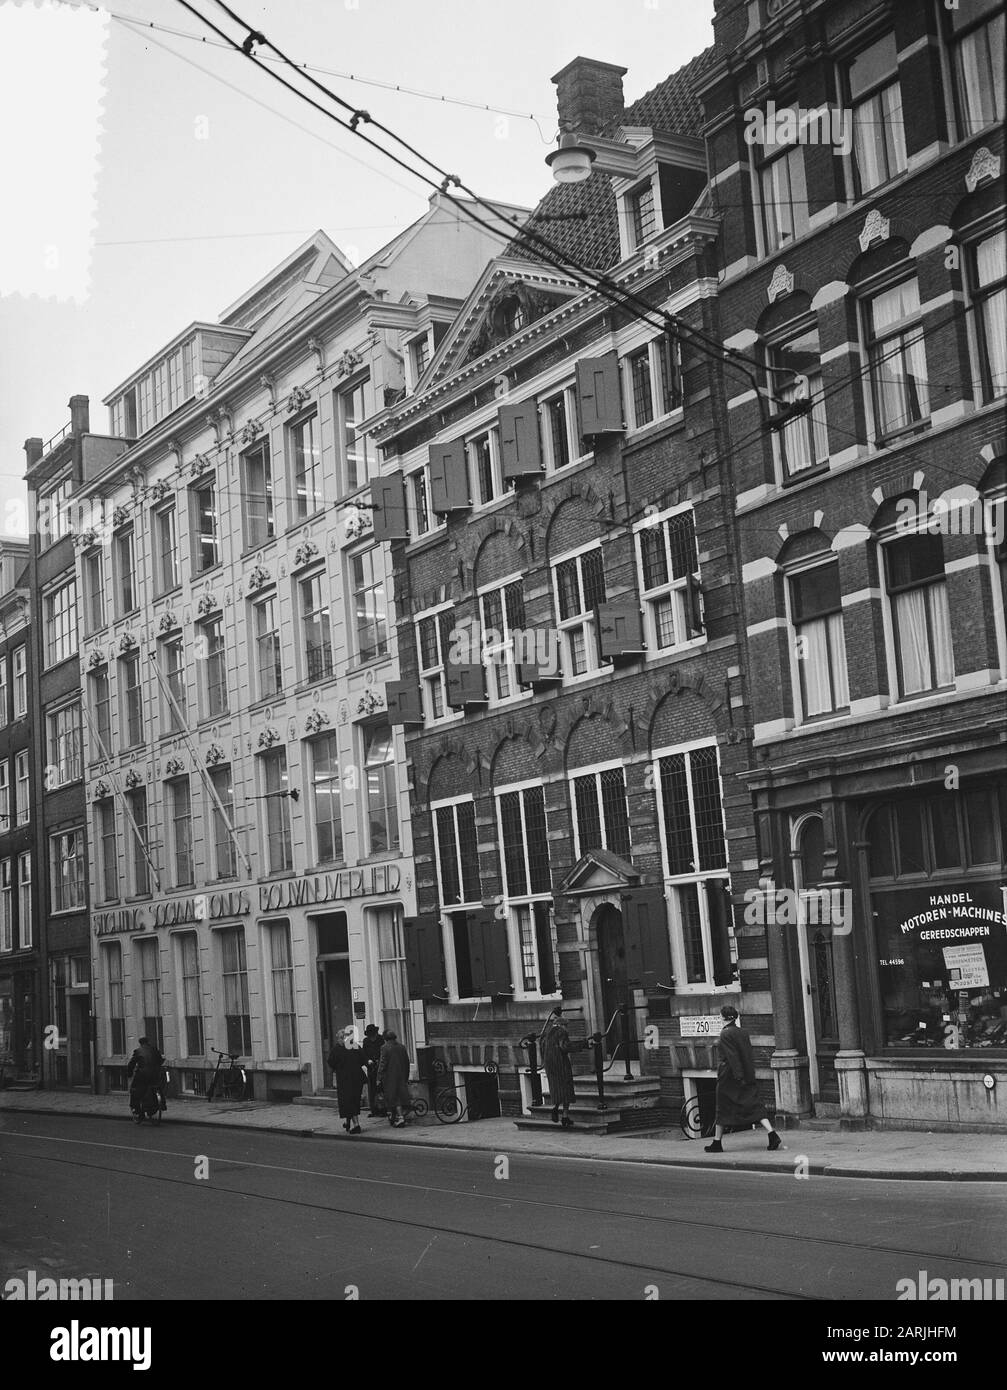 Townscapes, Rembrandthuis Date: December 14, 1955 Keywords: Cityscapes Institution name: Rembrandthuis Stock Photo